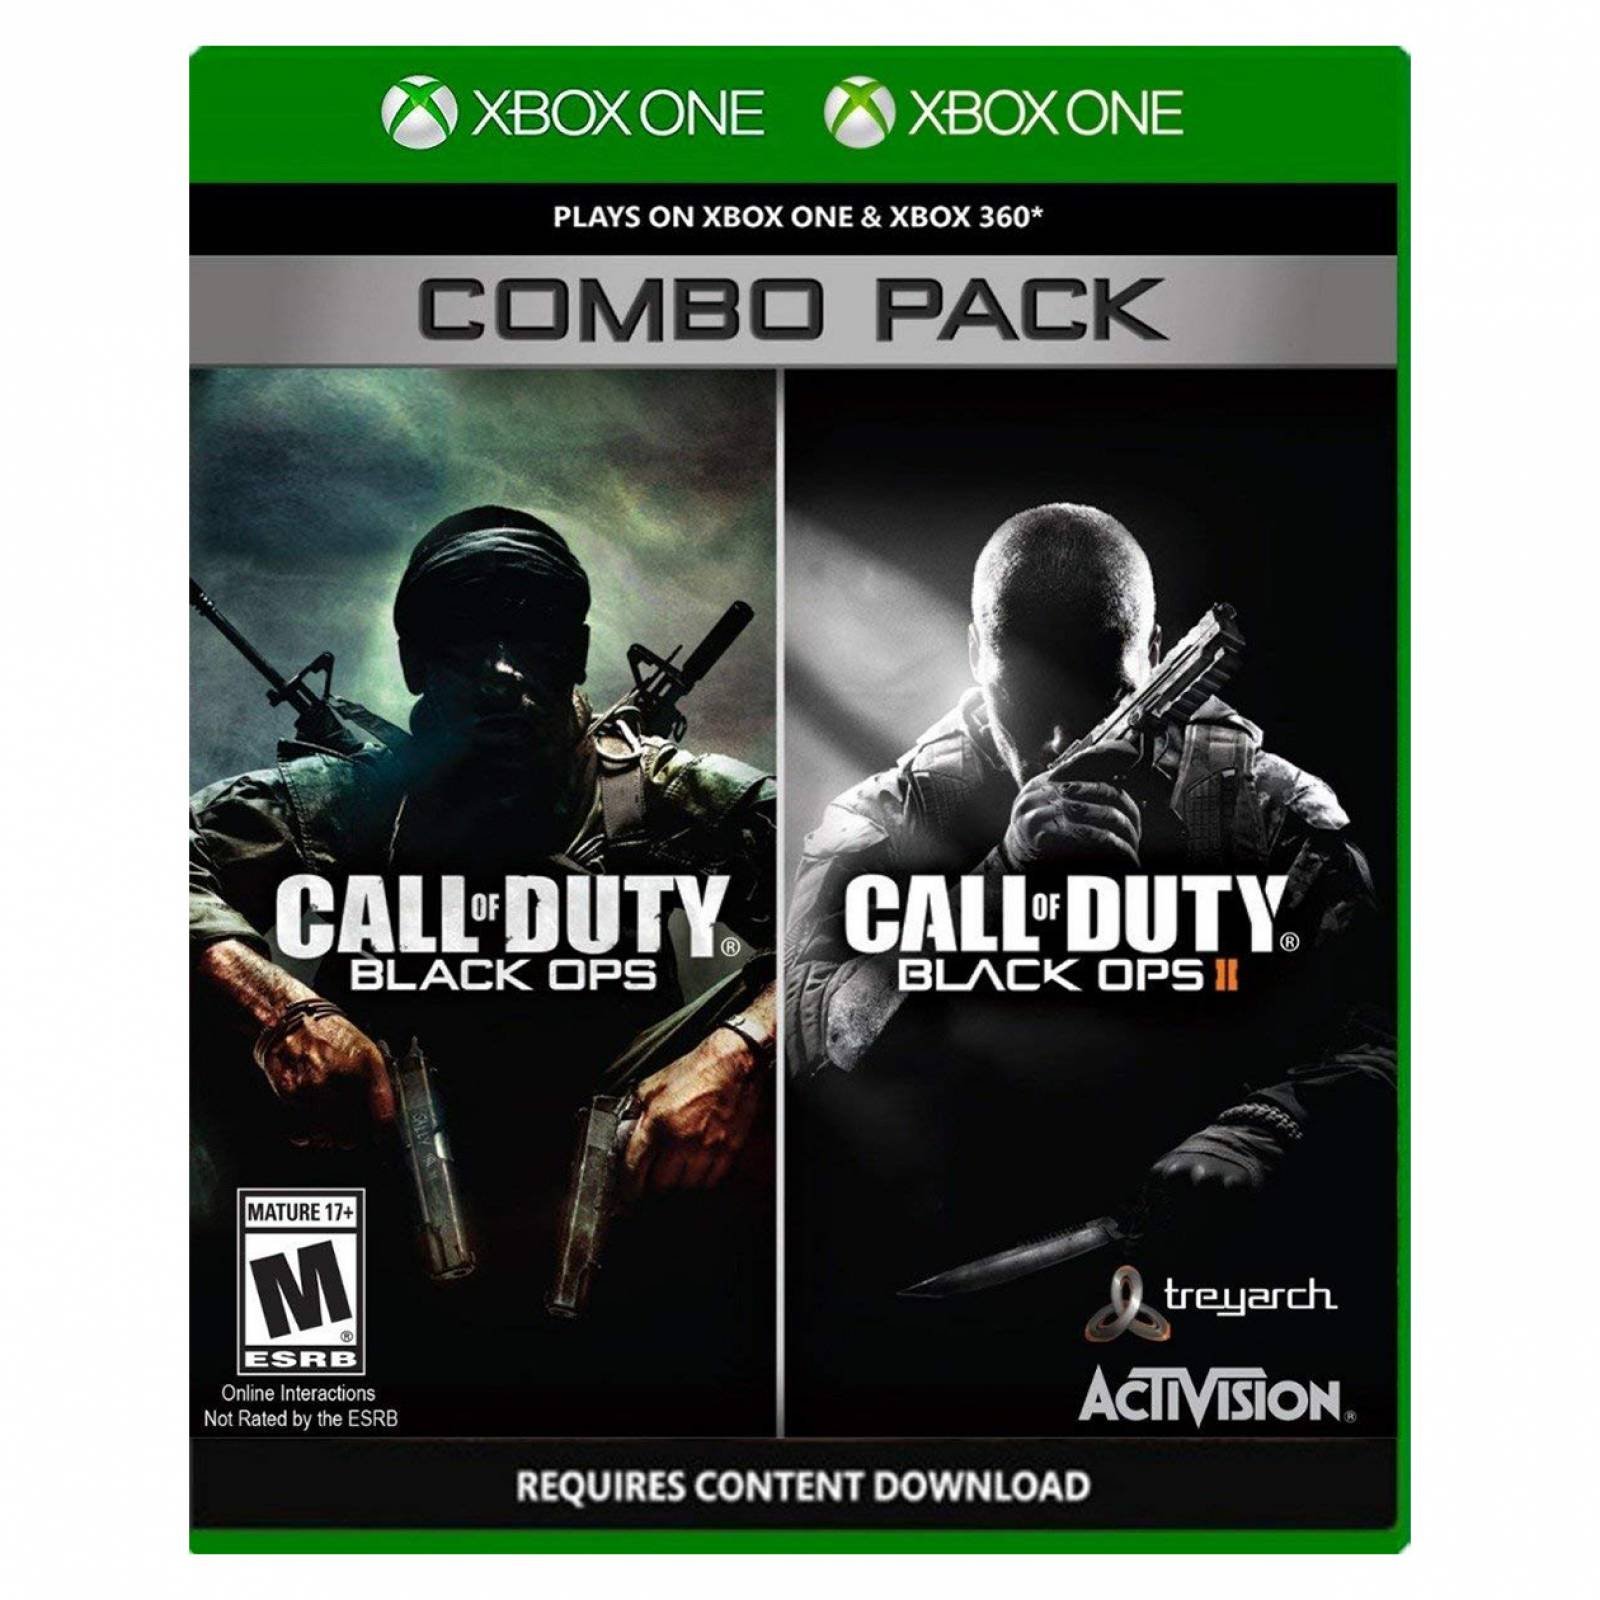 Mobile game combo pack. Call of Duty диск на Xbox 360. Call of Duty 2 Xbox 360. Black ops 2 Xbox 360 freeboot. Xbox one Call of Duty Black ops2 наклейка.